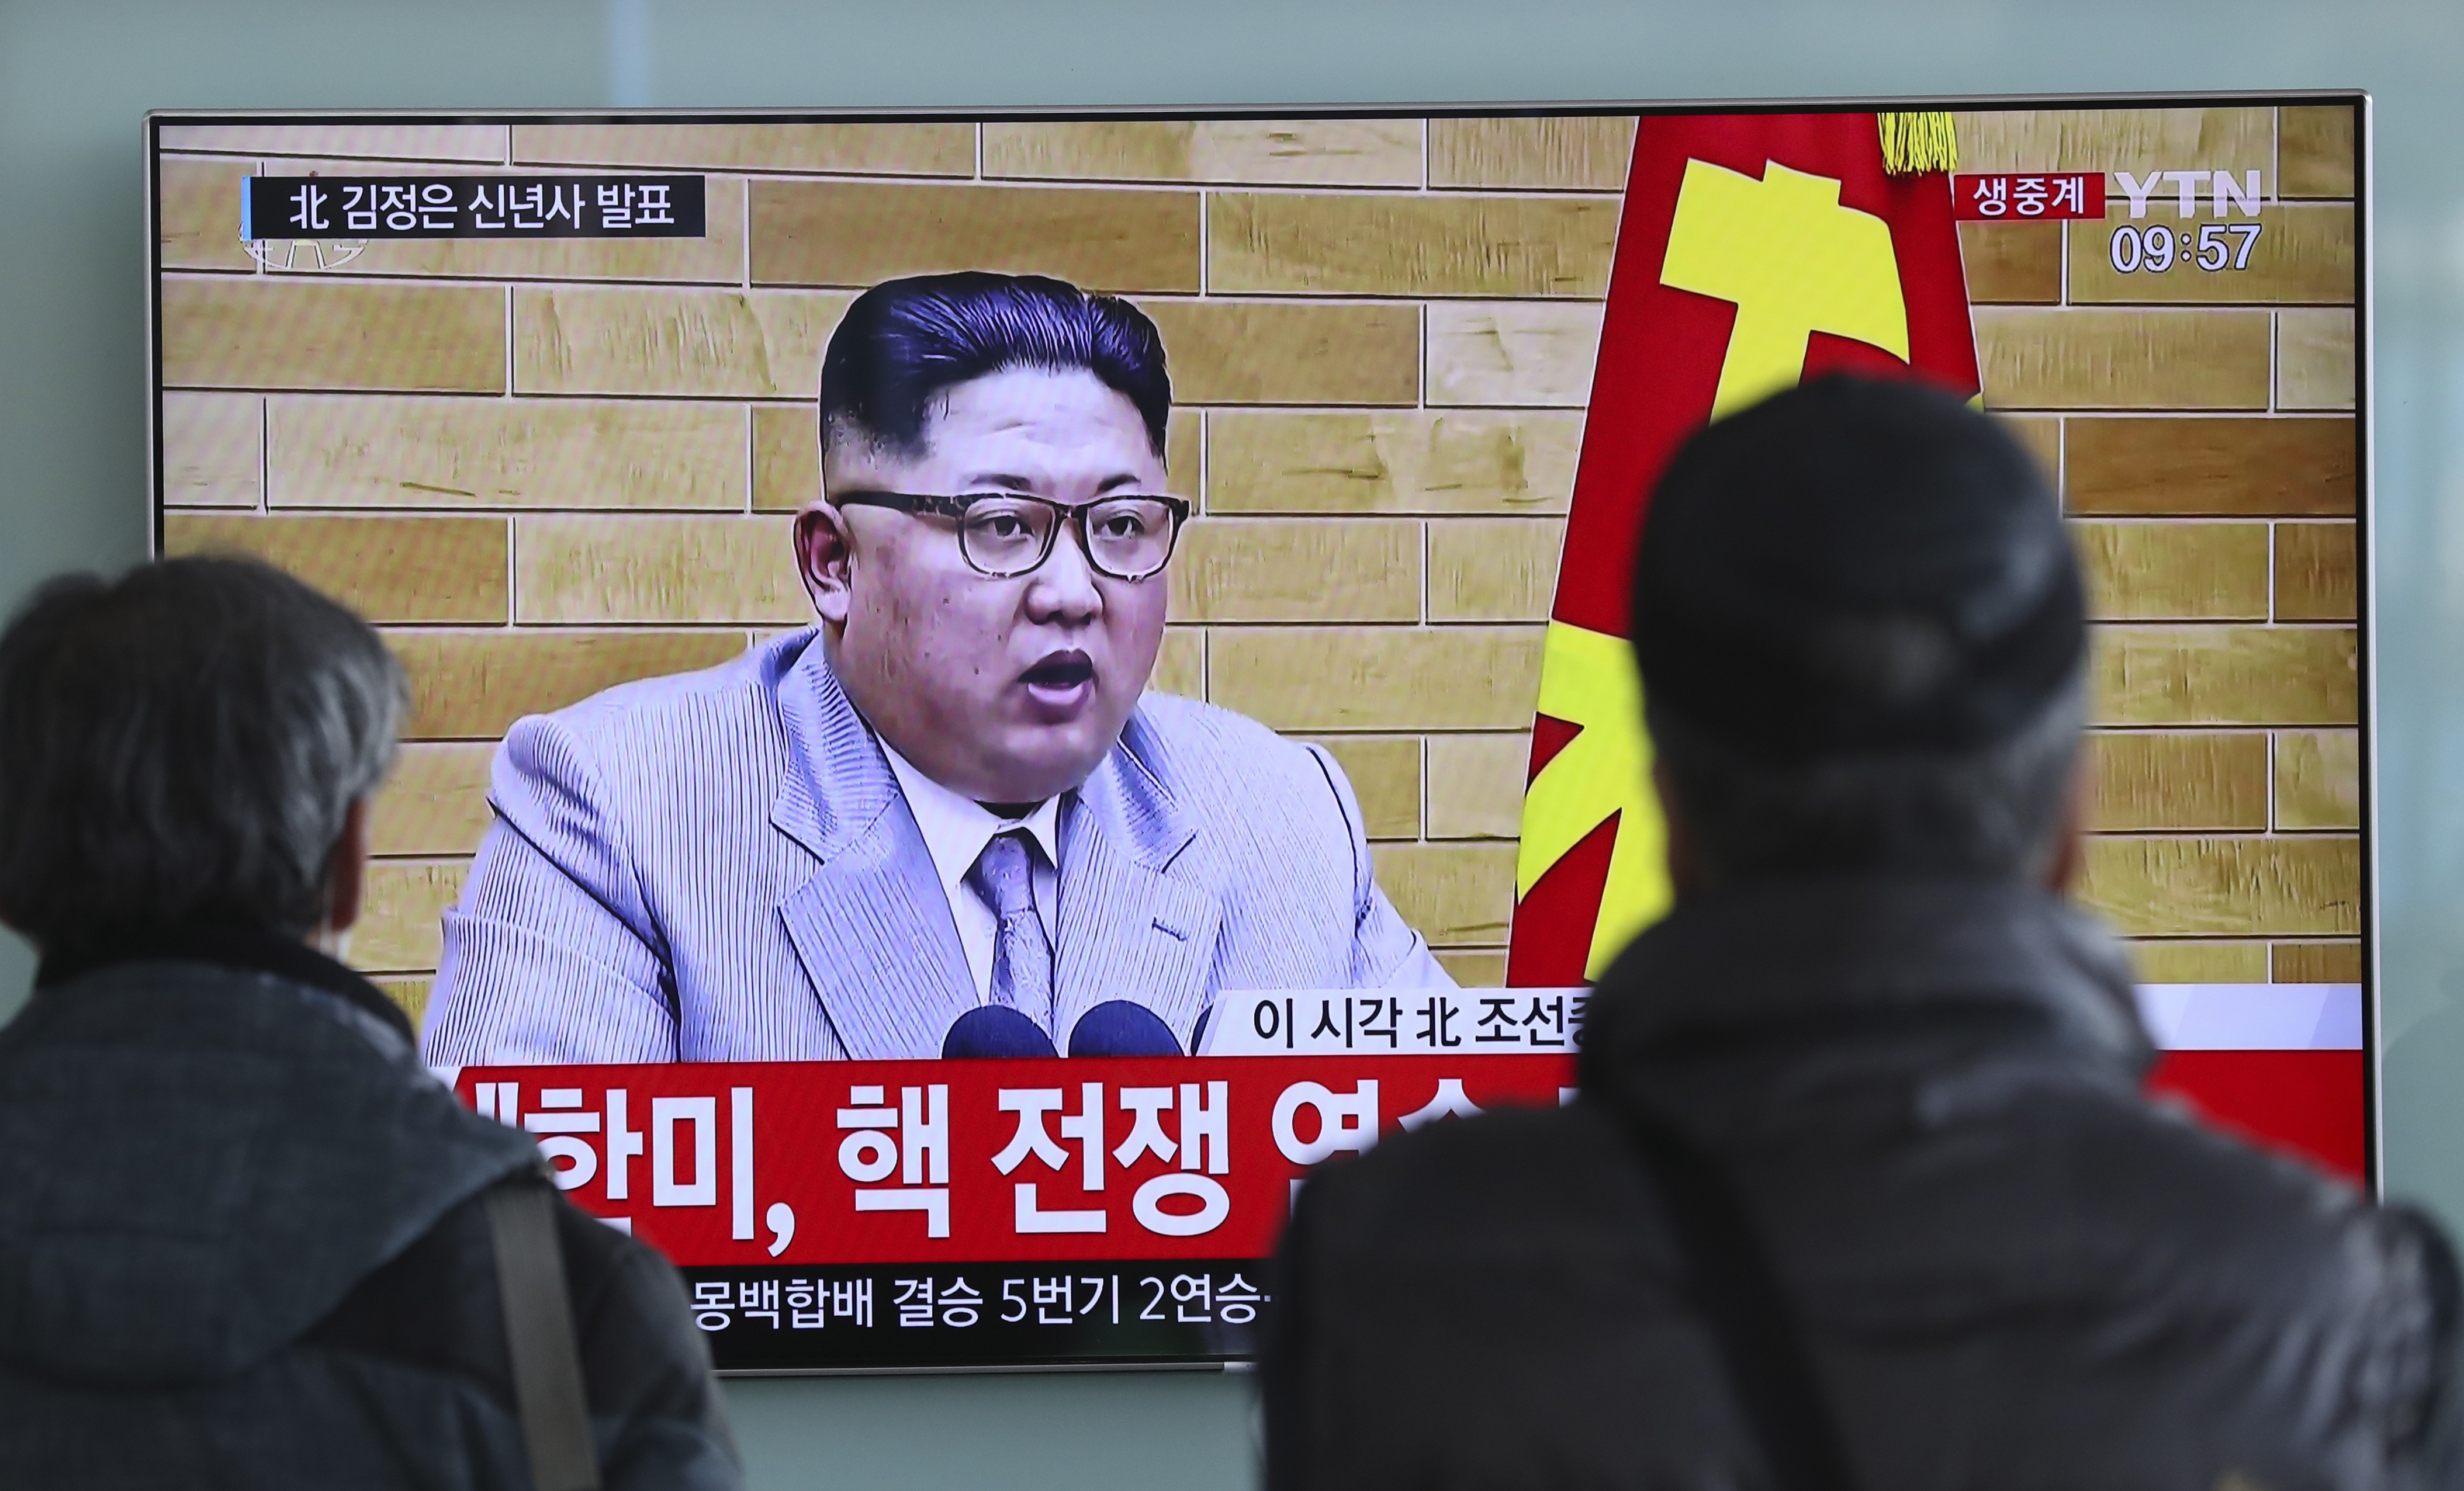 Commuters stop to watch a TV news programme showing North Korean leader Kim Jong-un’s New Year address, at the Seoul Railway Station on January 1. Photo: AP